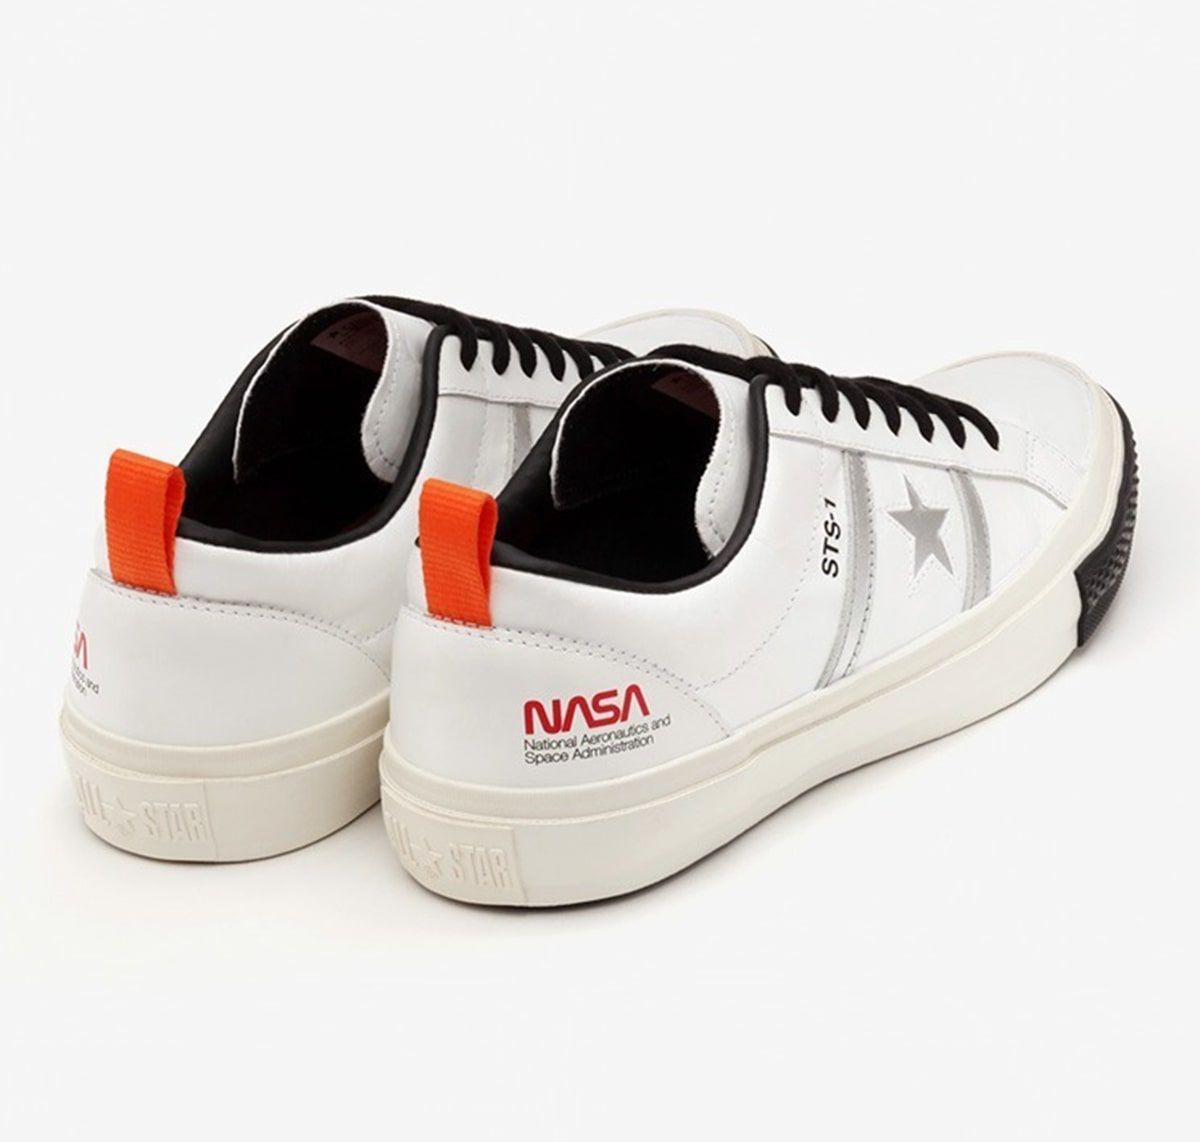 NASA x Converse Collection is Coming Soon | HOUSE OF HEAT